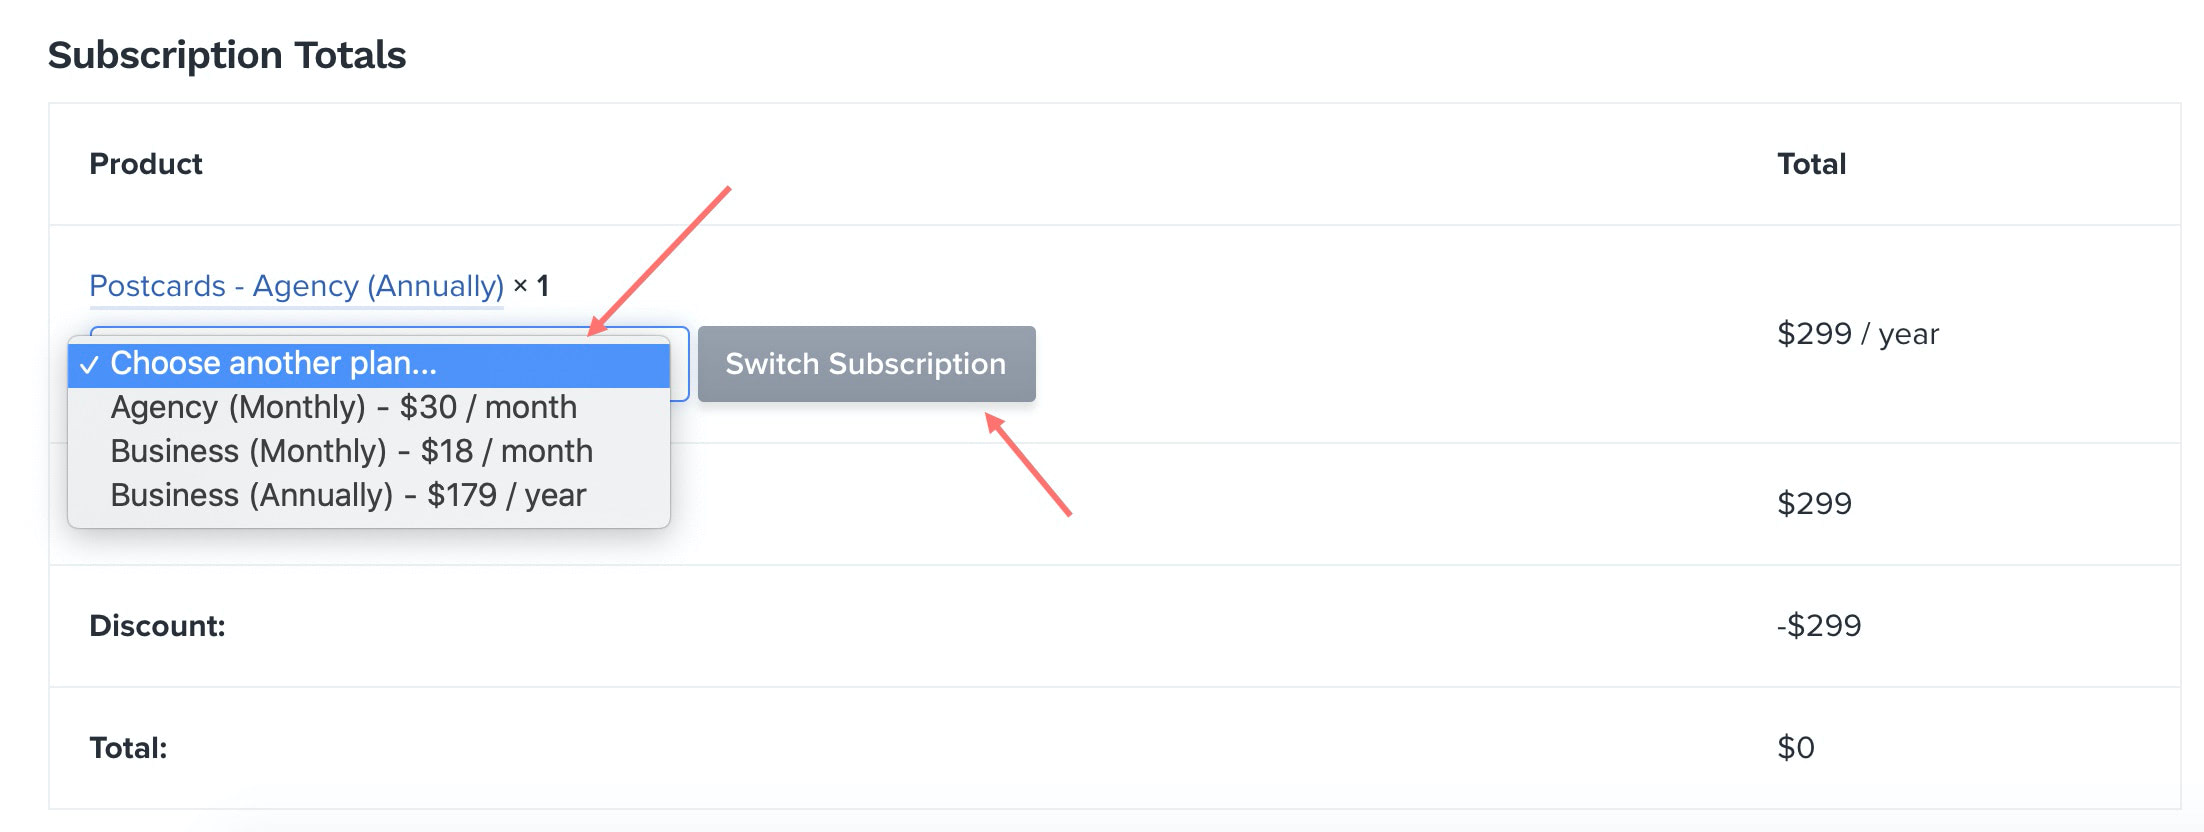 Switch Subscription